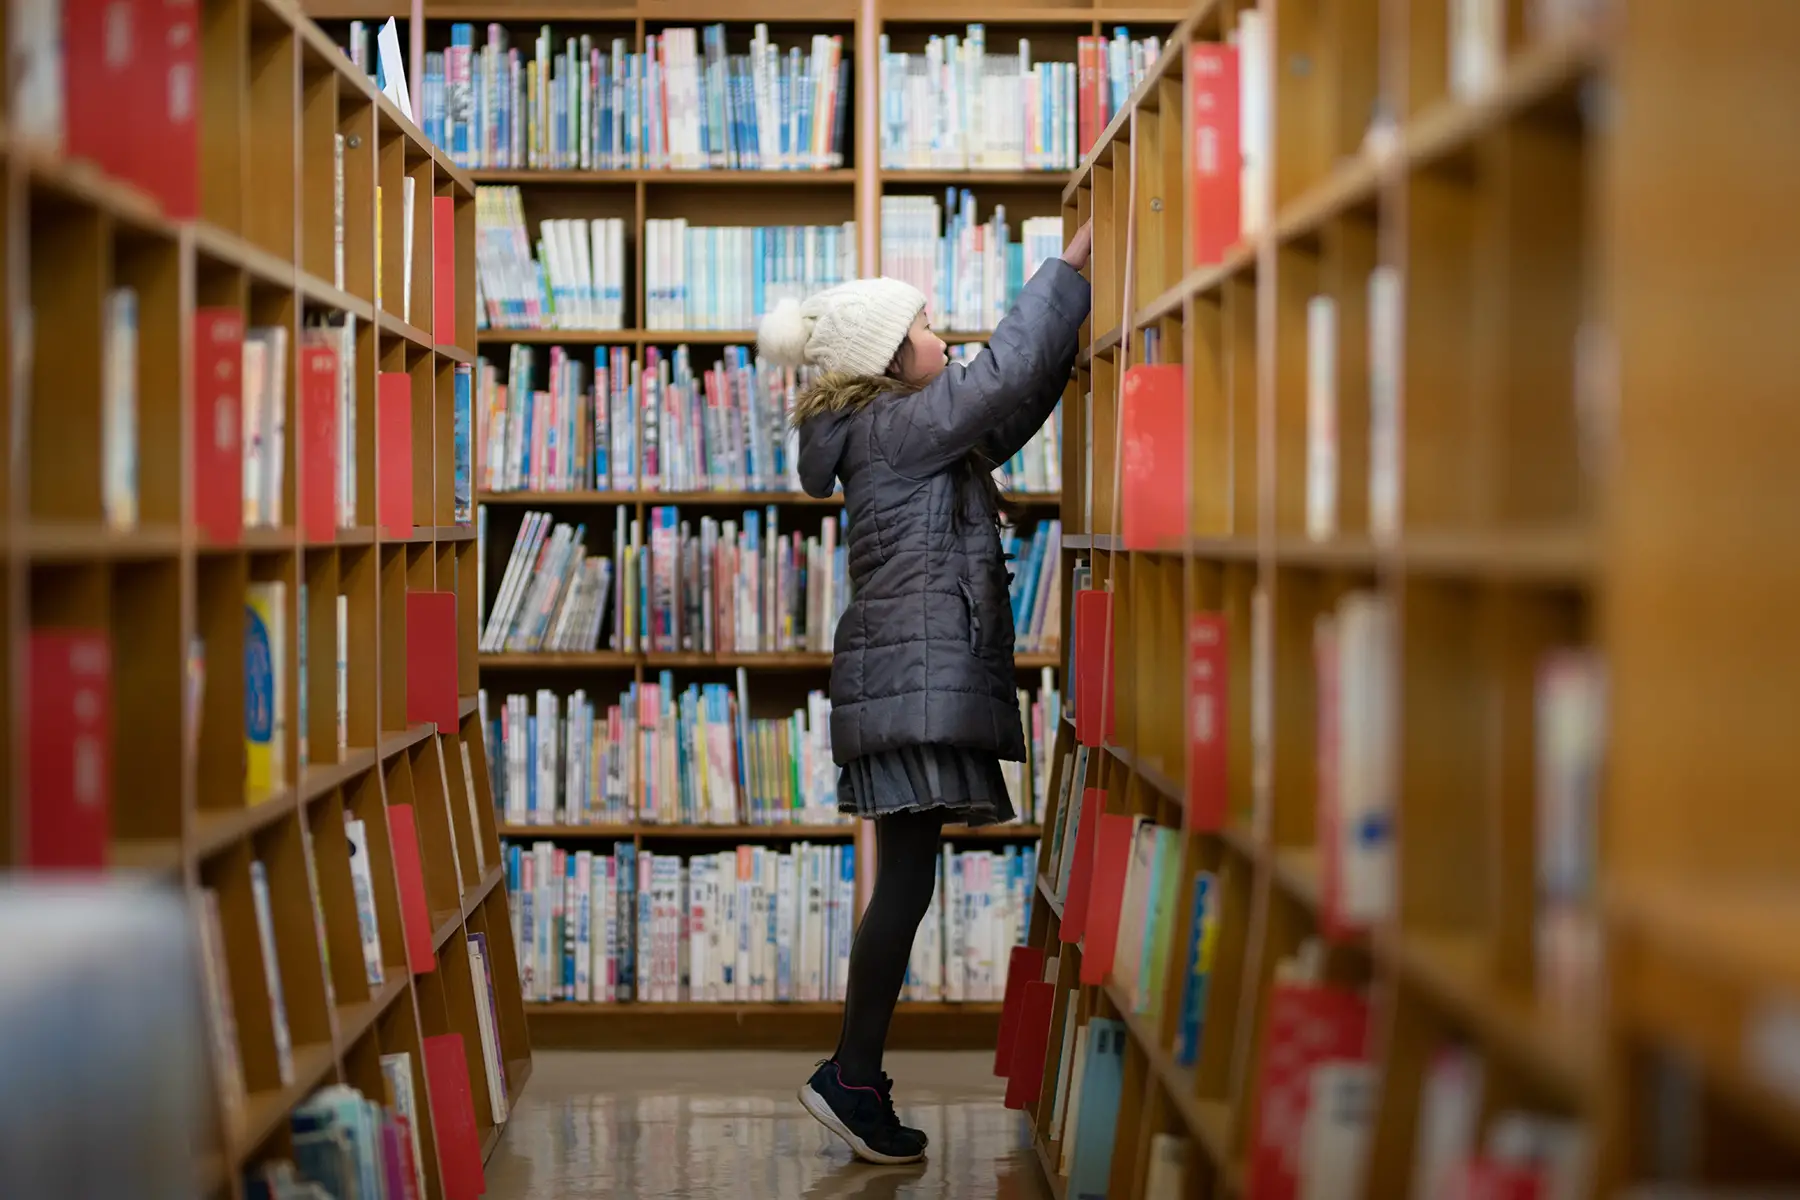 A young girl standing on tiptoe to choose a book in a library